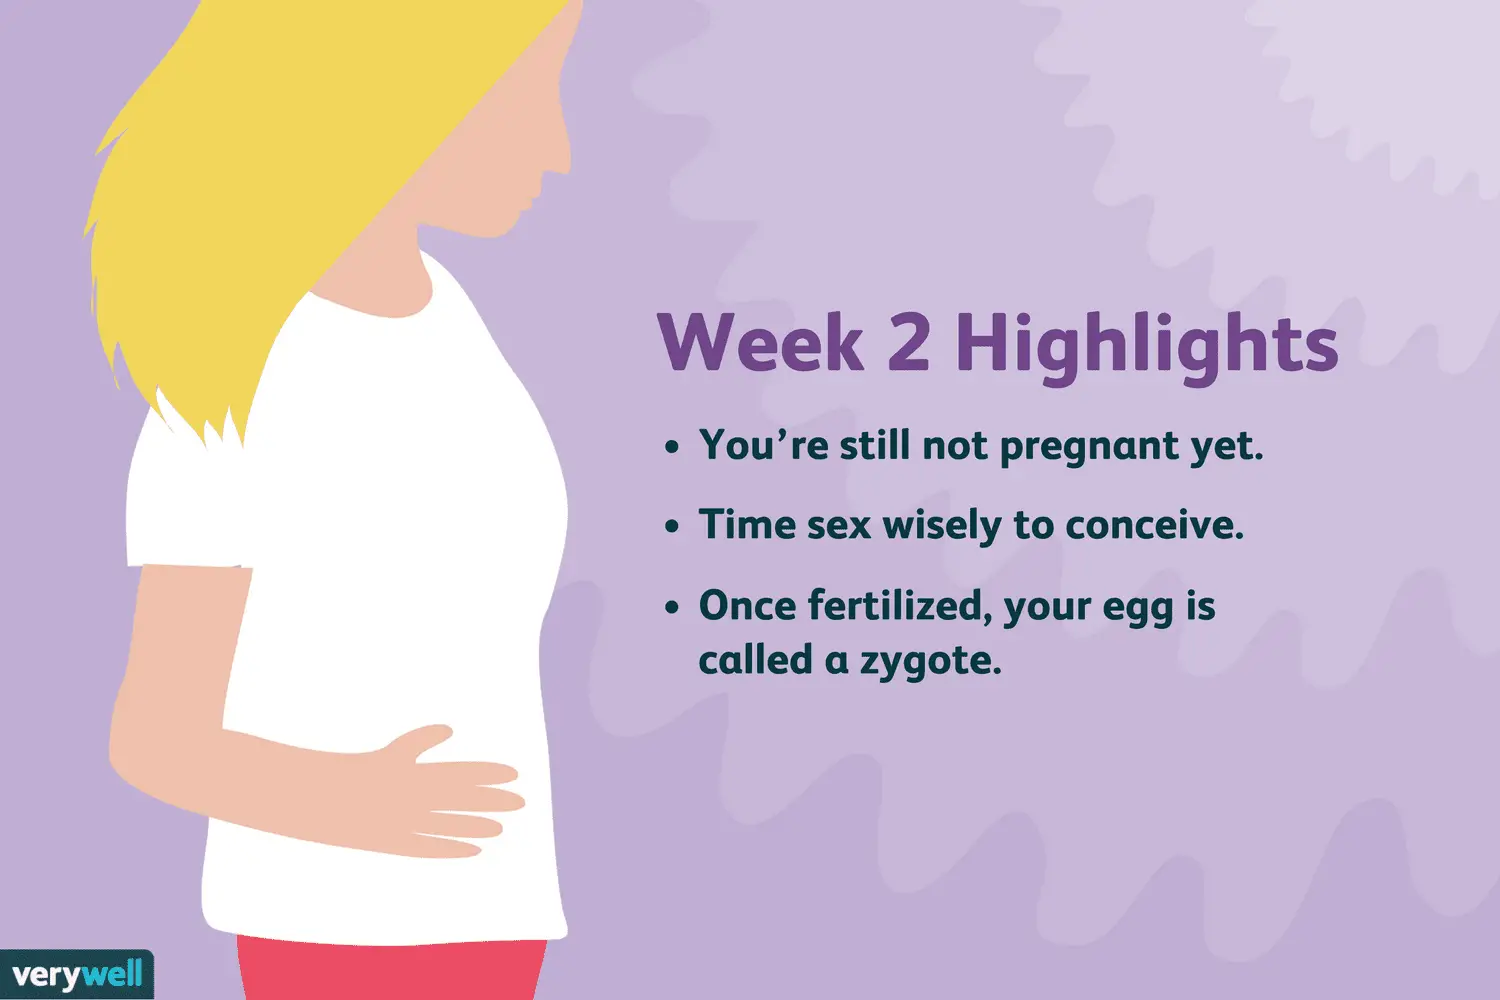 2 Weeks Pregnant: Symptoms, Baby Development, and More